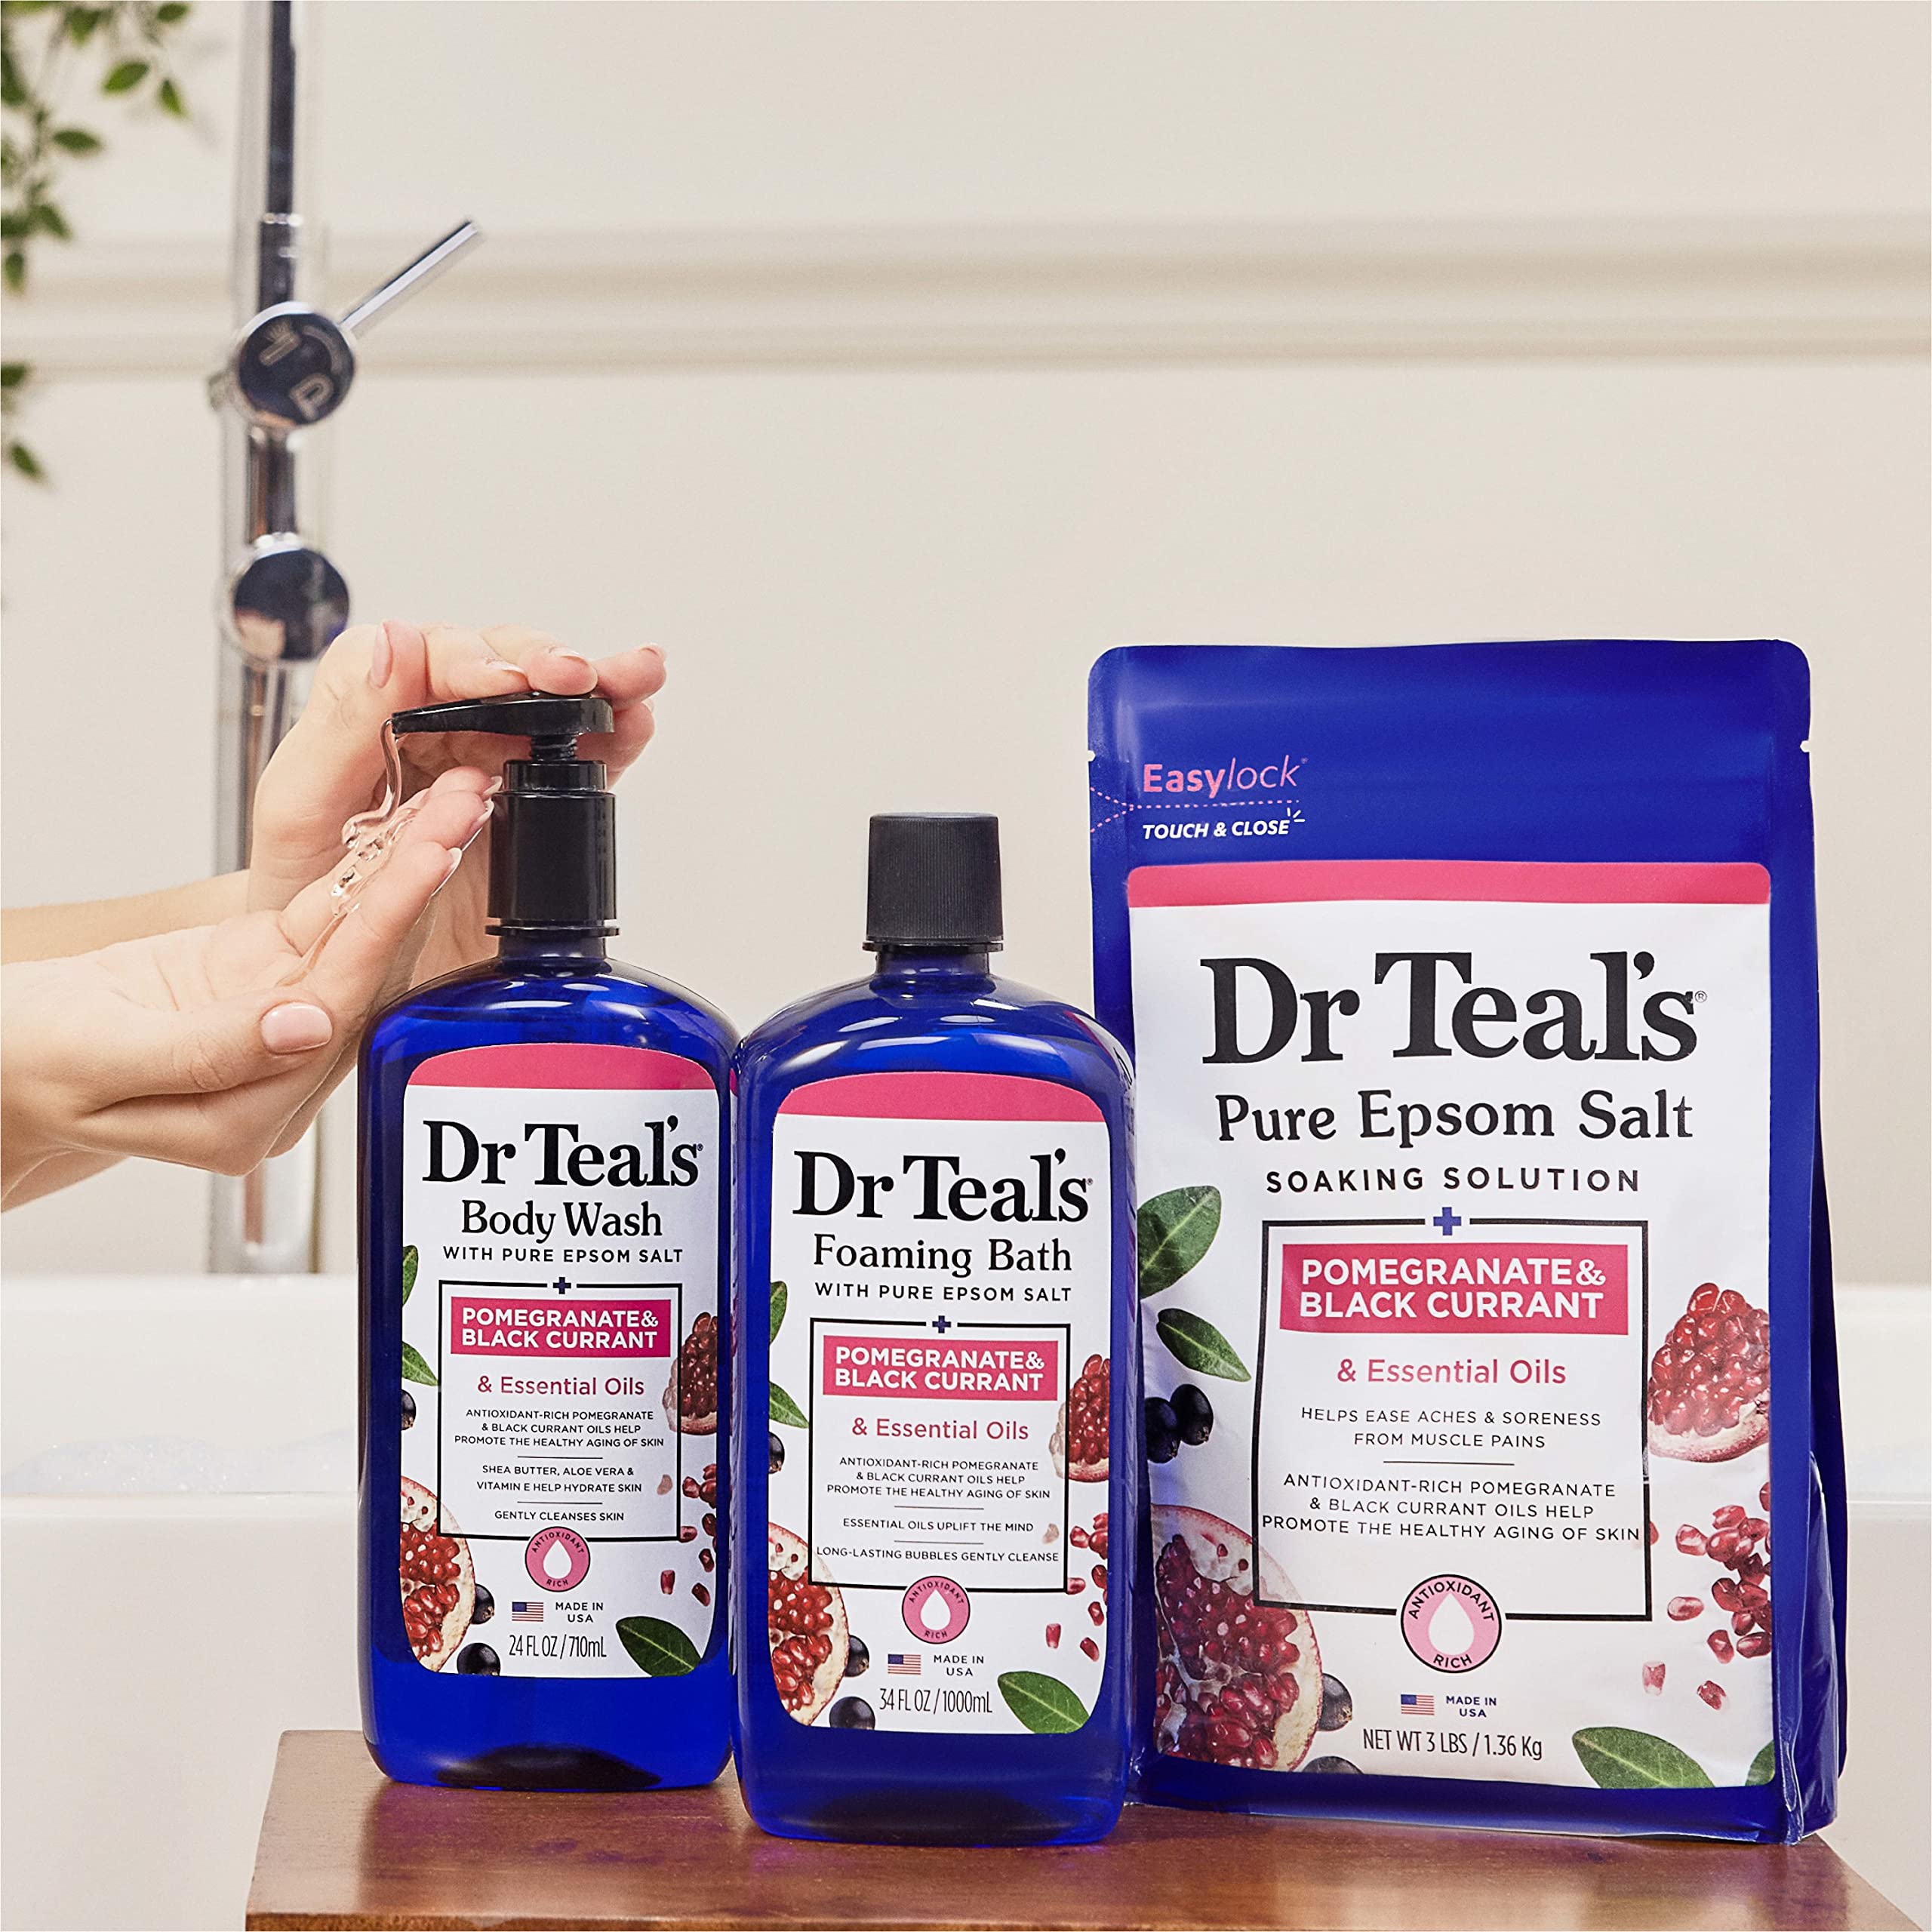 Dr Teal's Pure Epsom Salt, Pomegranate & Black Currant, 3 lbs (Packaging May Vary)